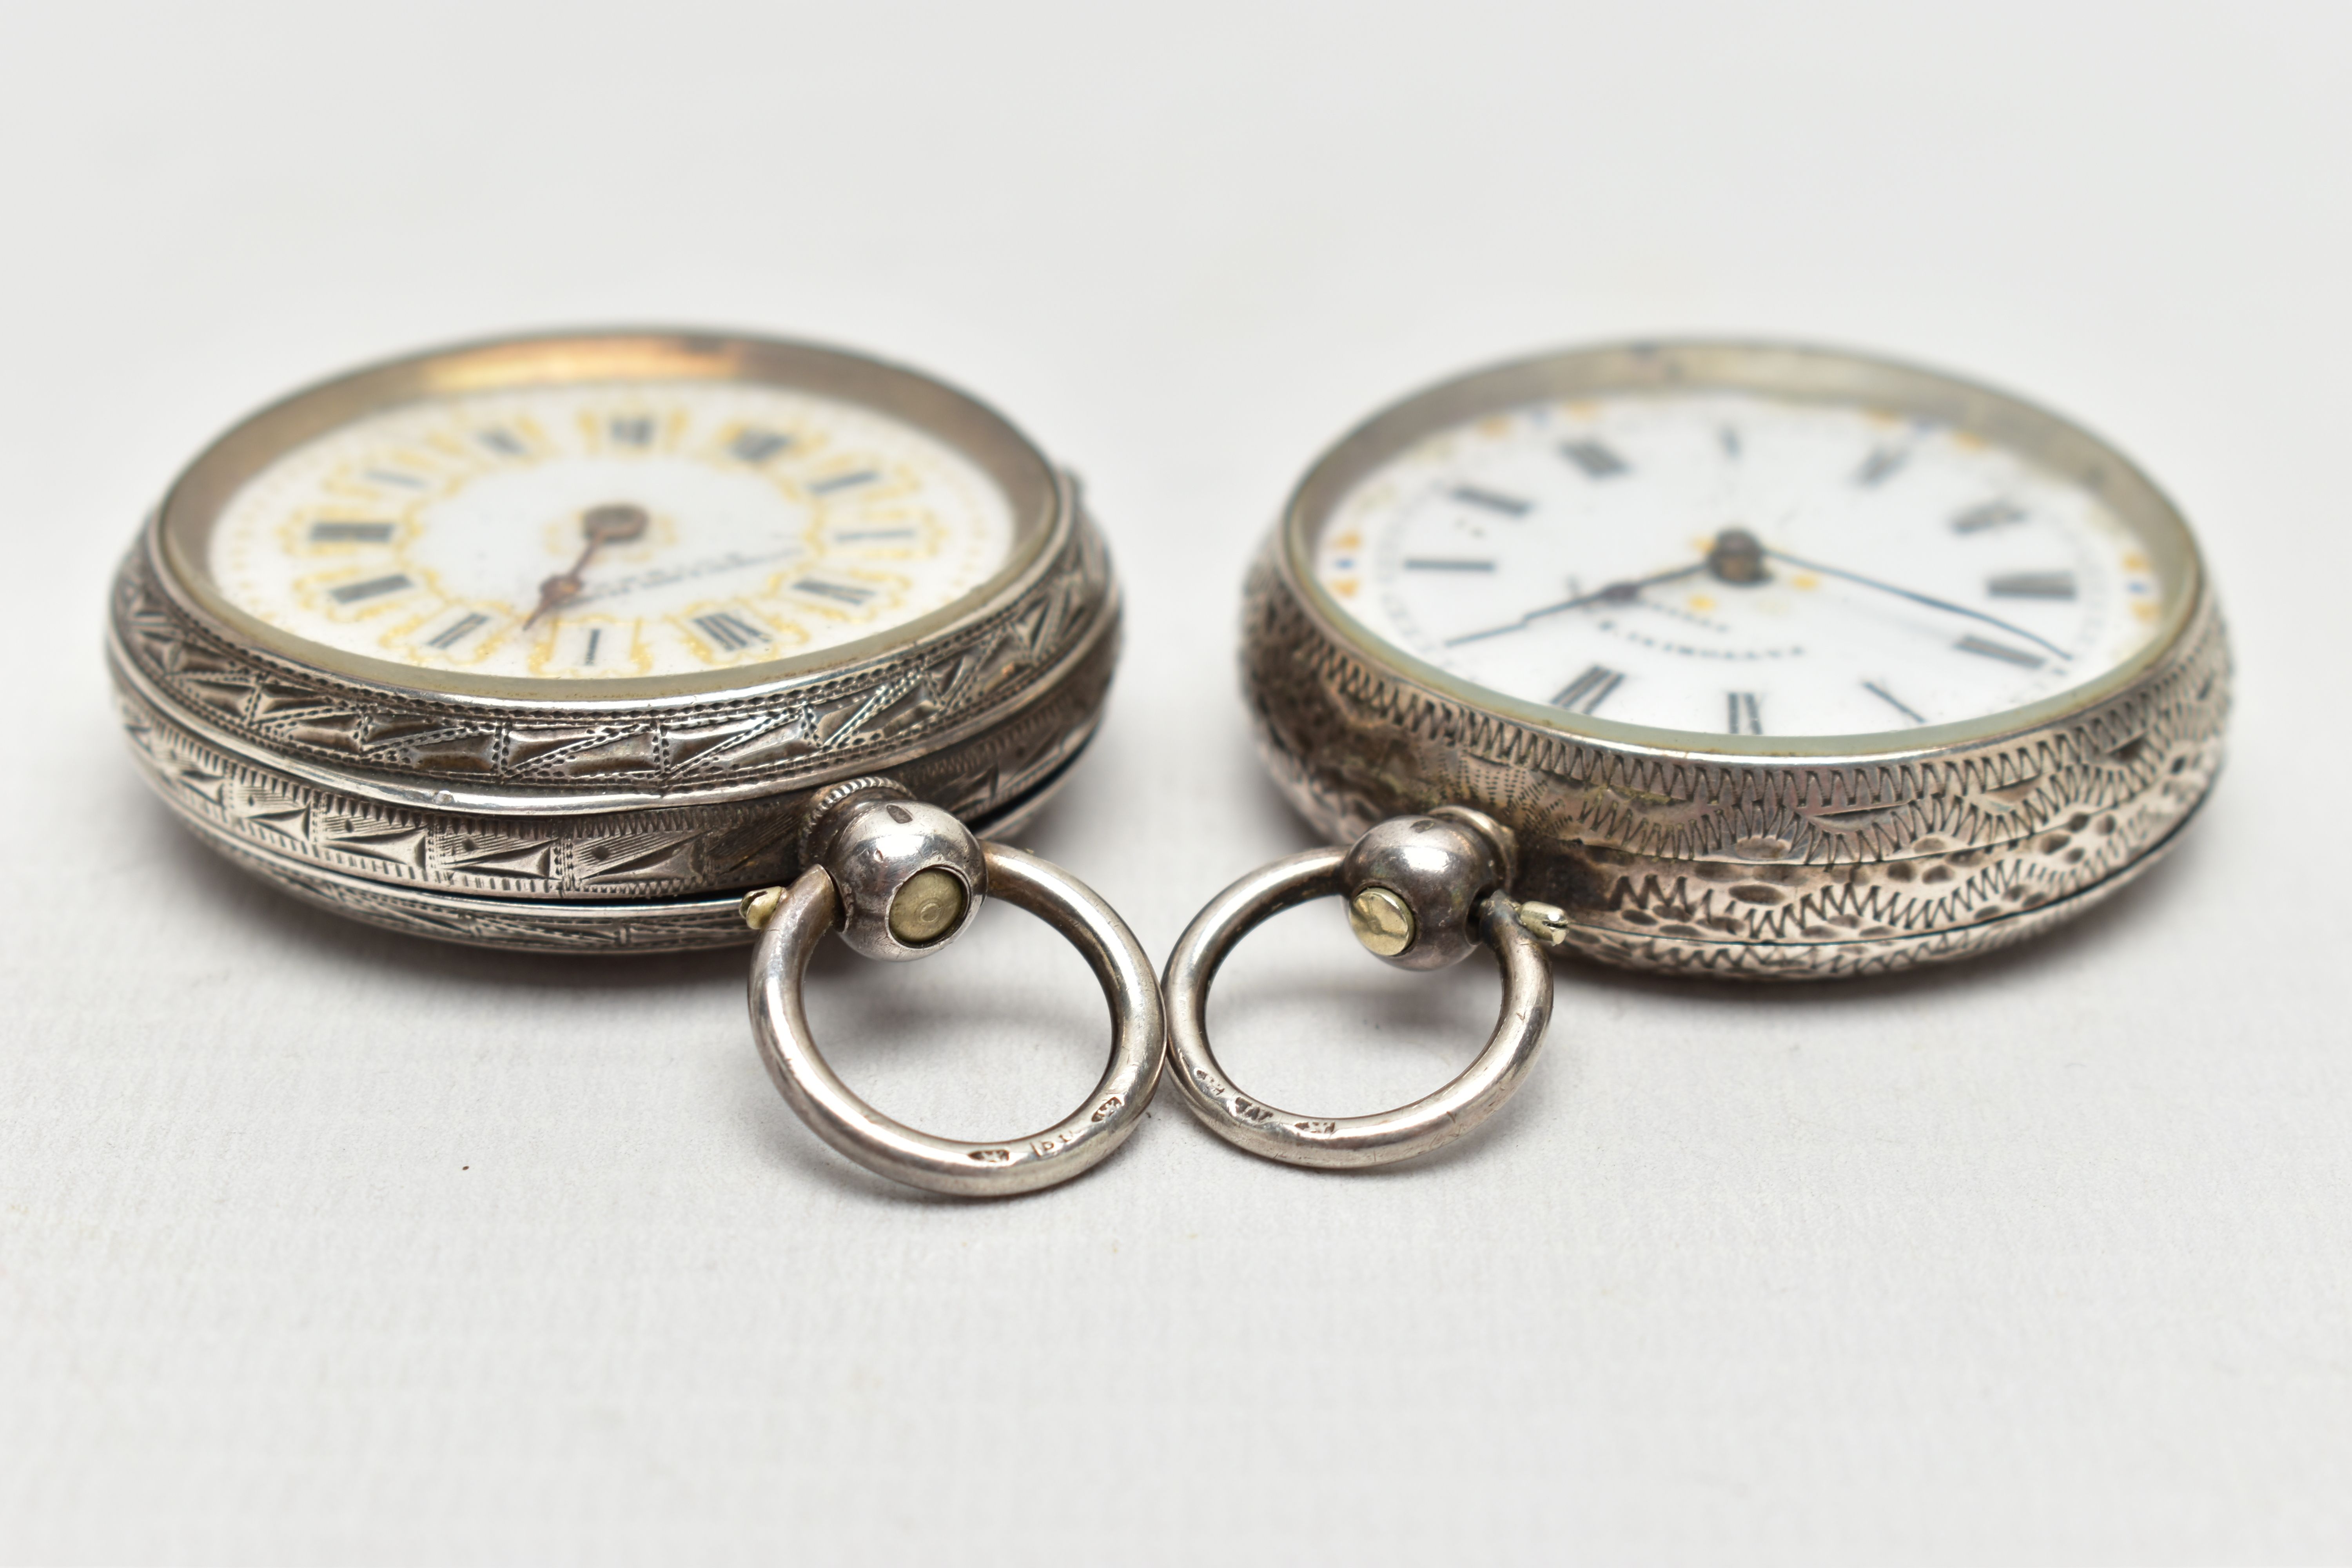 TWO SILVER LADIES POCKET WATCHES, the first a white circular dial with Roman numeral hourly markers, - Image 3 of 5